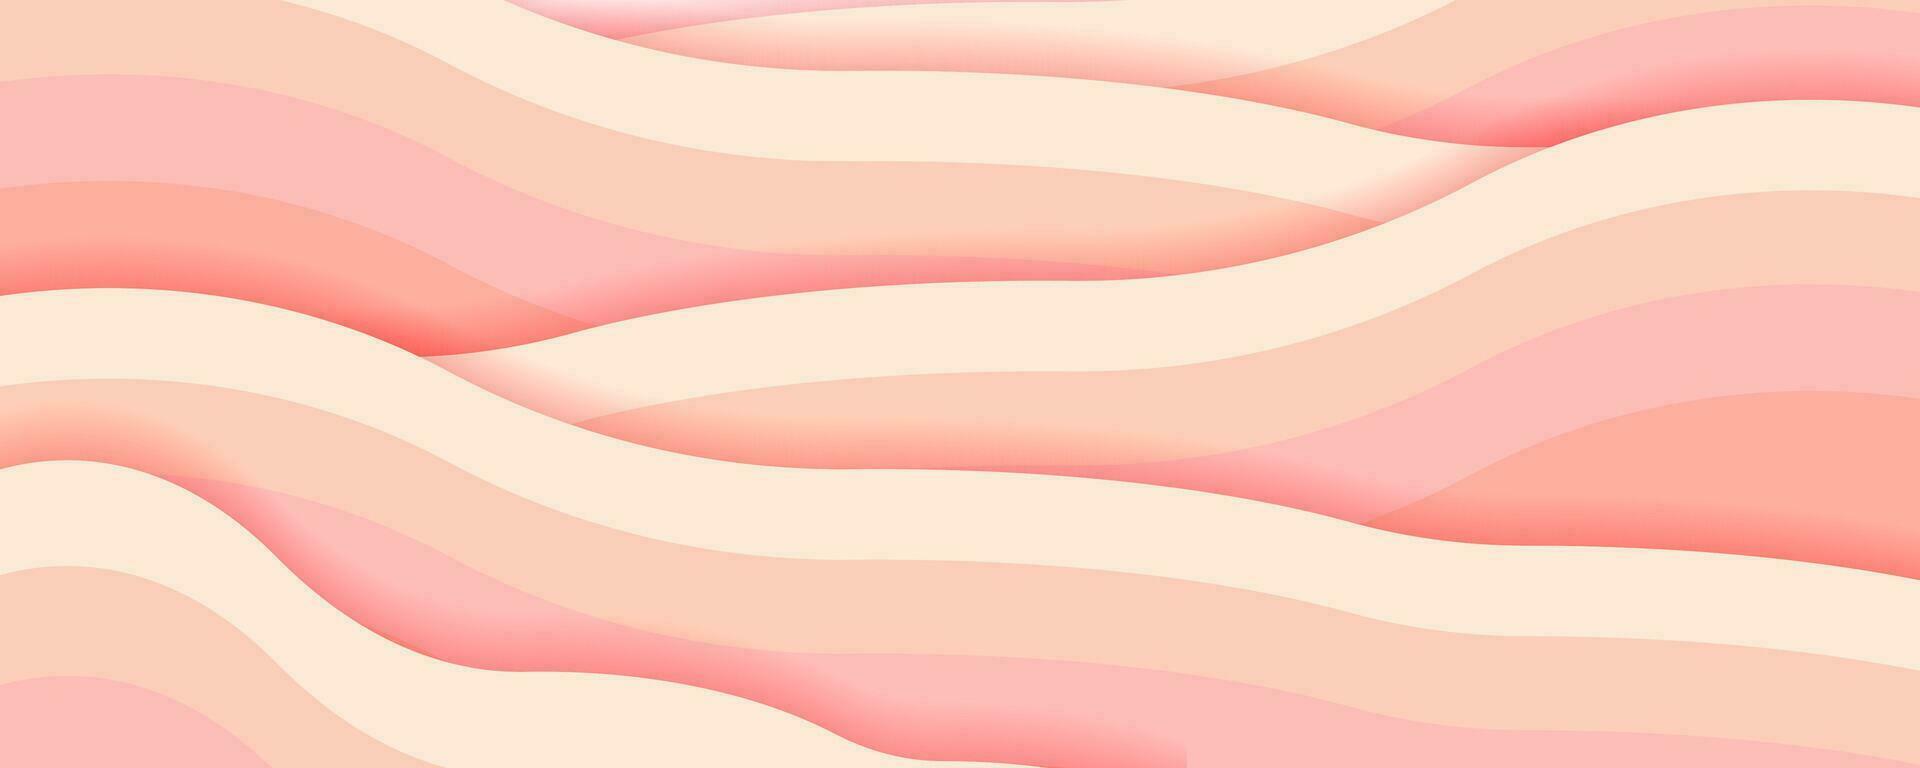 Background in paper style with a variety of multicolored lines. vector